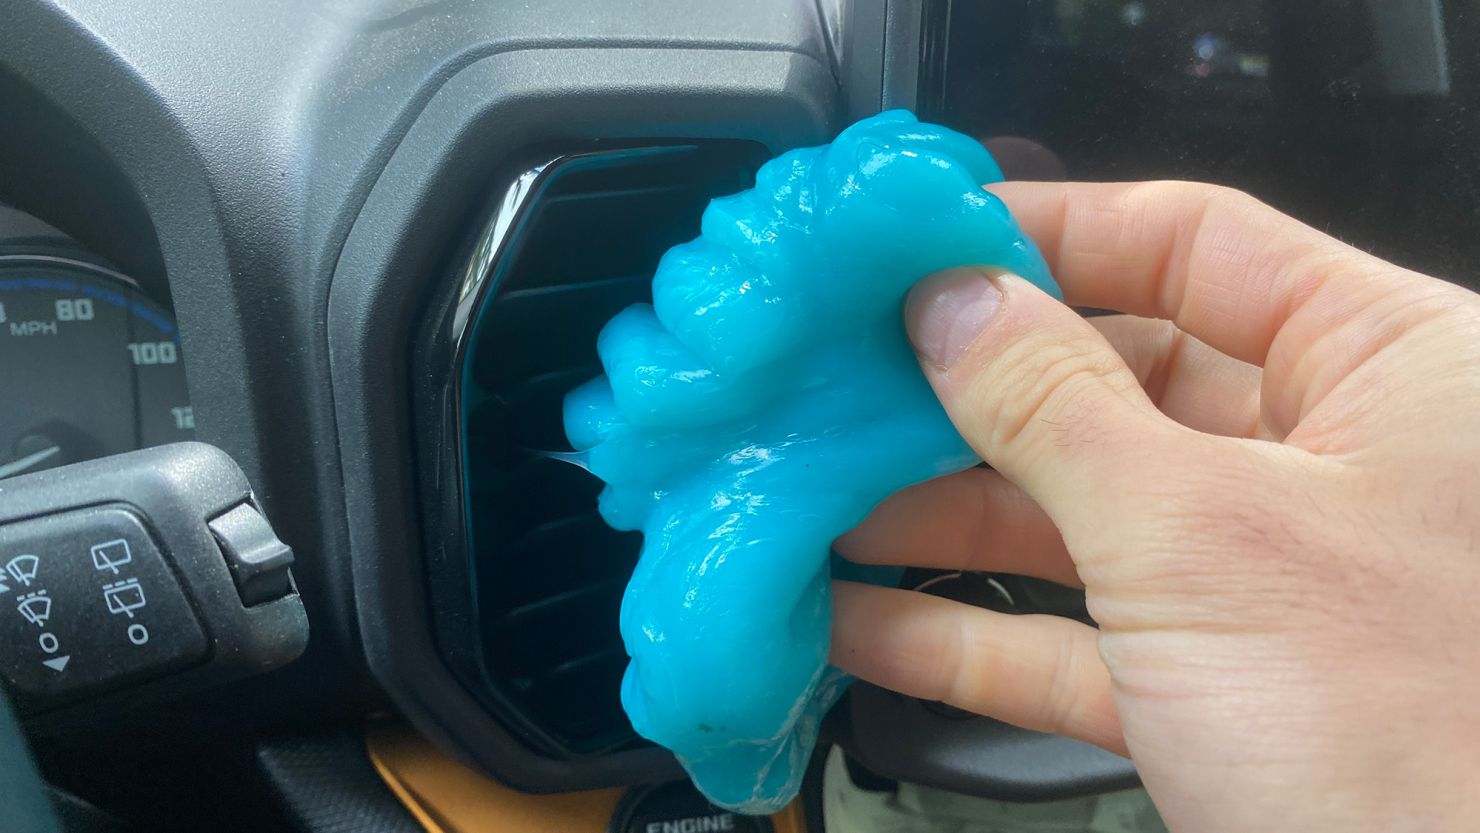 Can You Clean Your Car With Slime? - Old Cars Weekly Guides